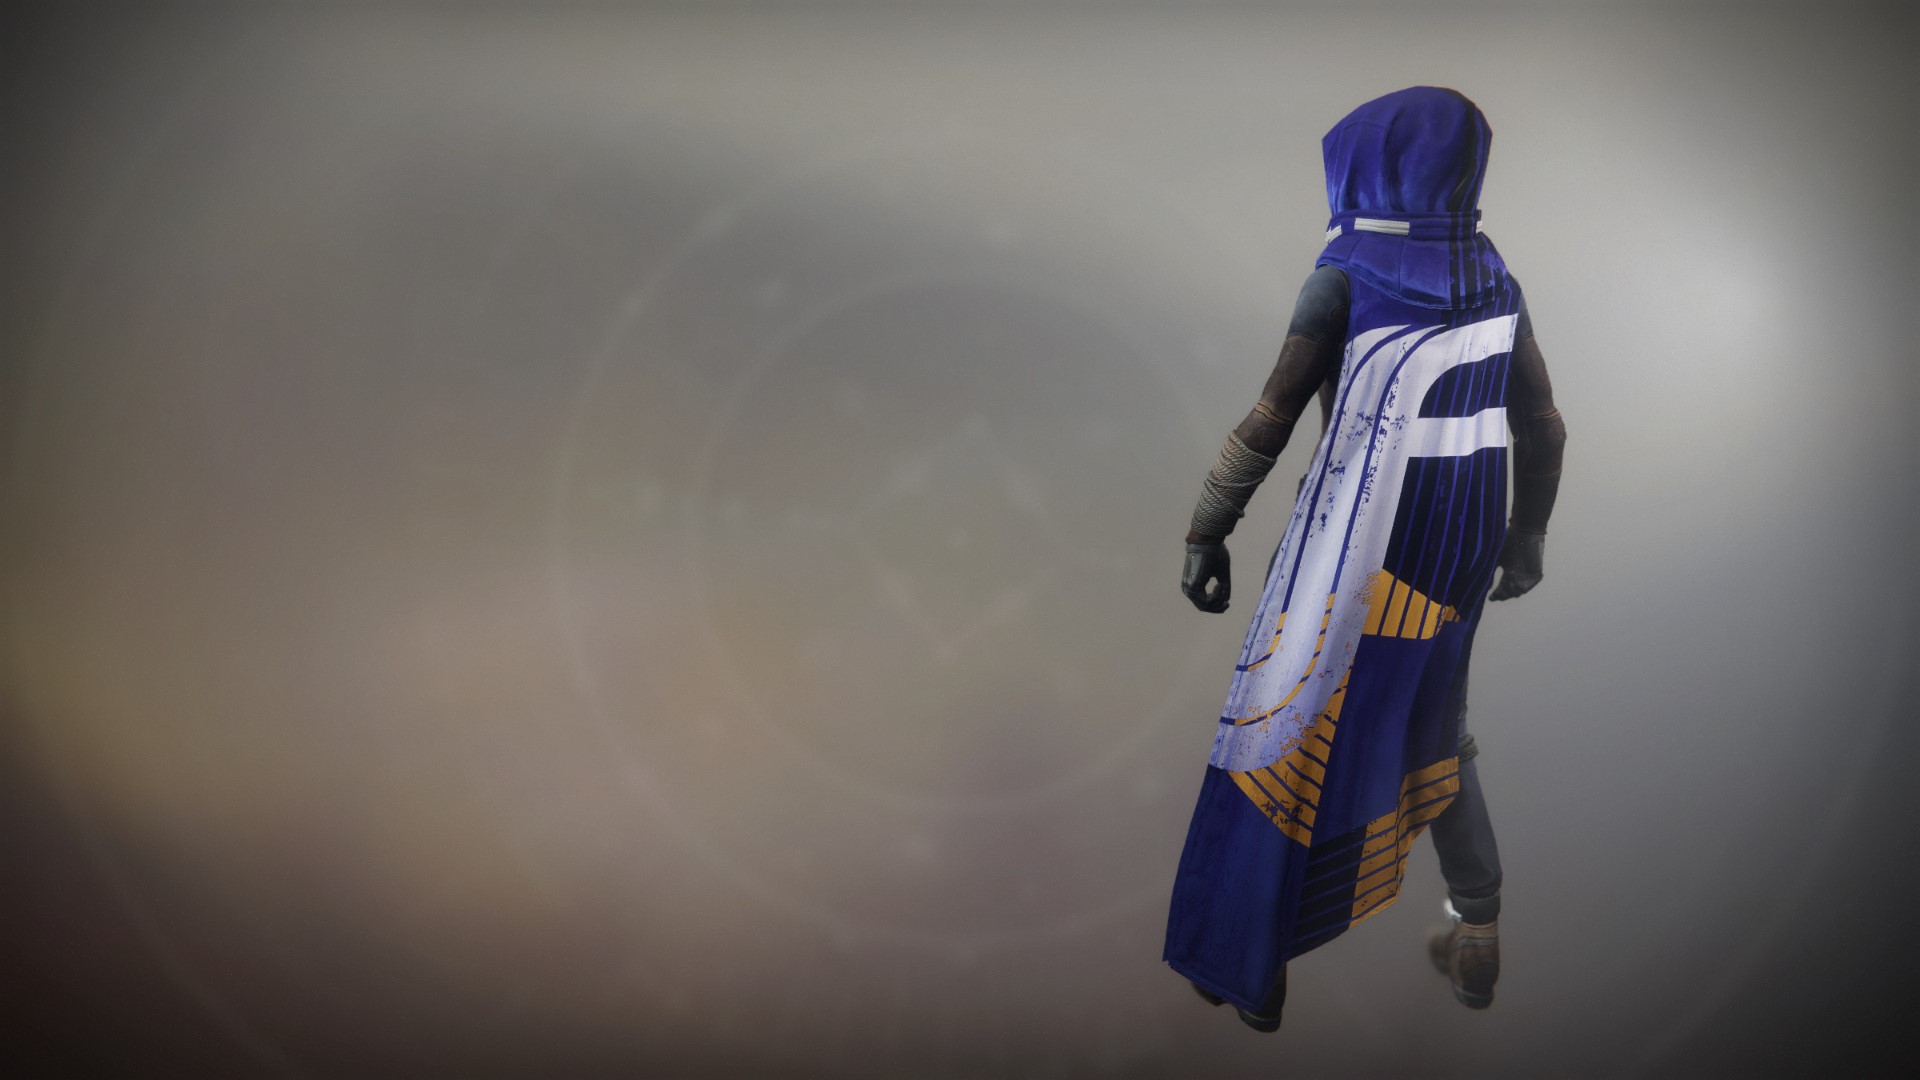 An in-game render of the Cape of Eternal War.